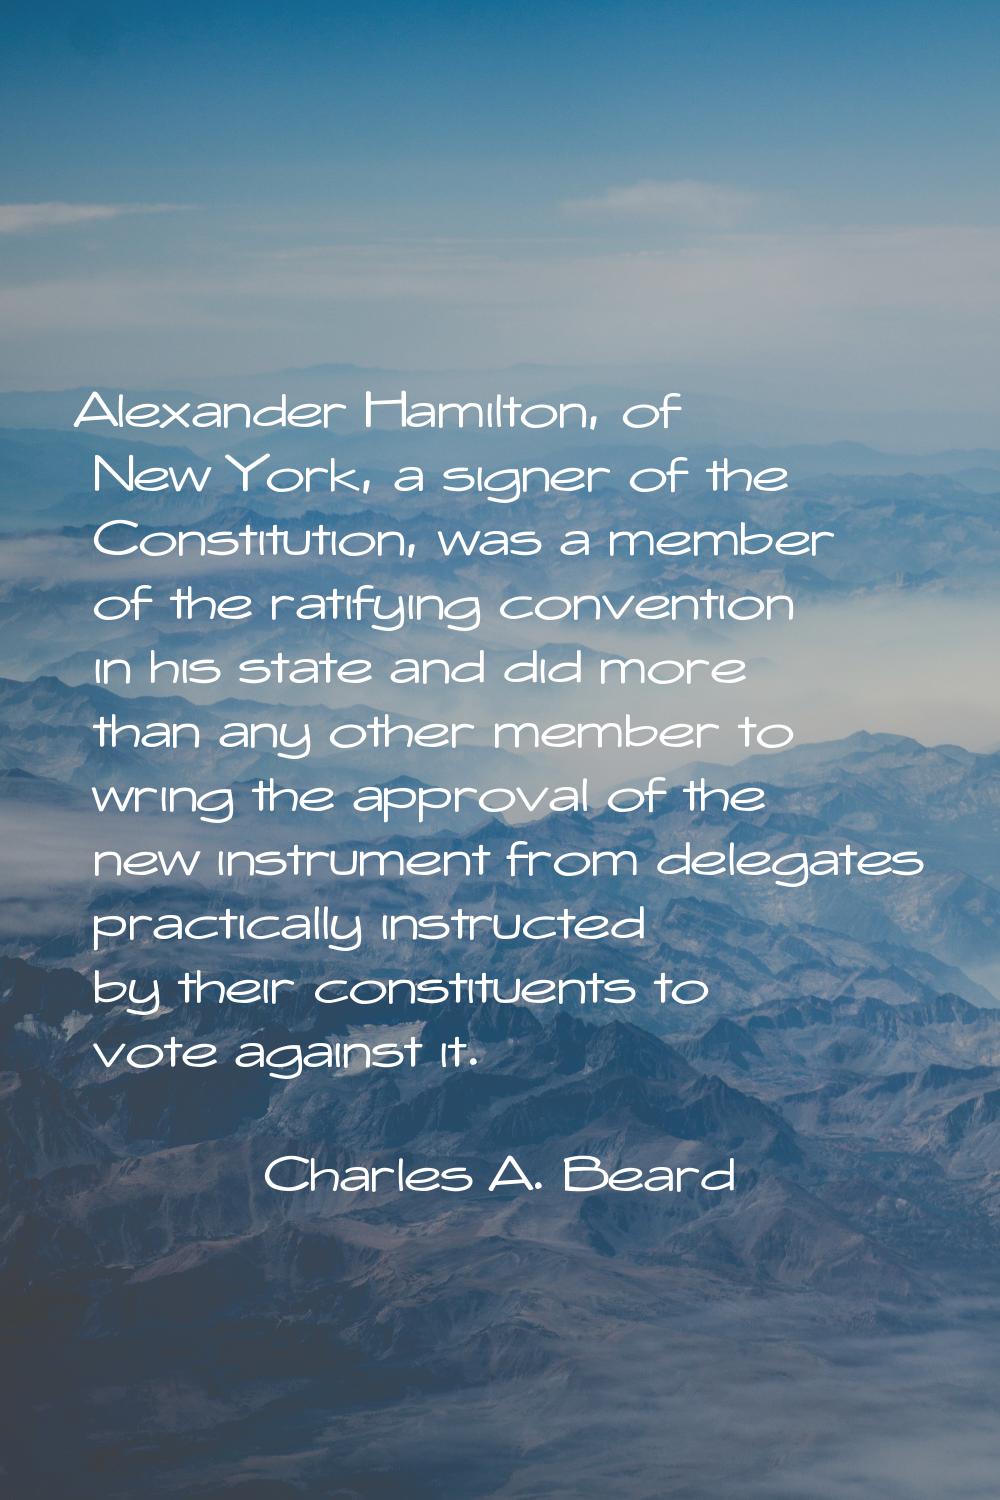 Alexander Hamilton, of New York, a signer of the Constitution, was a member of the ratifying conven